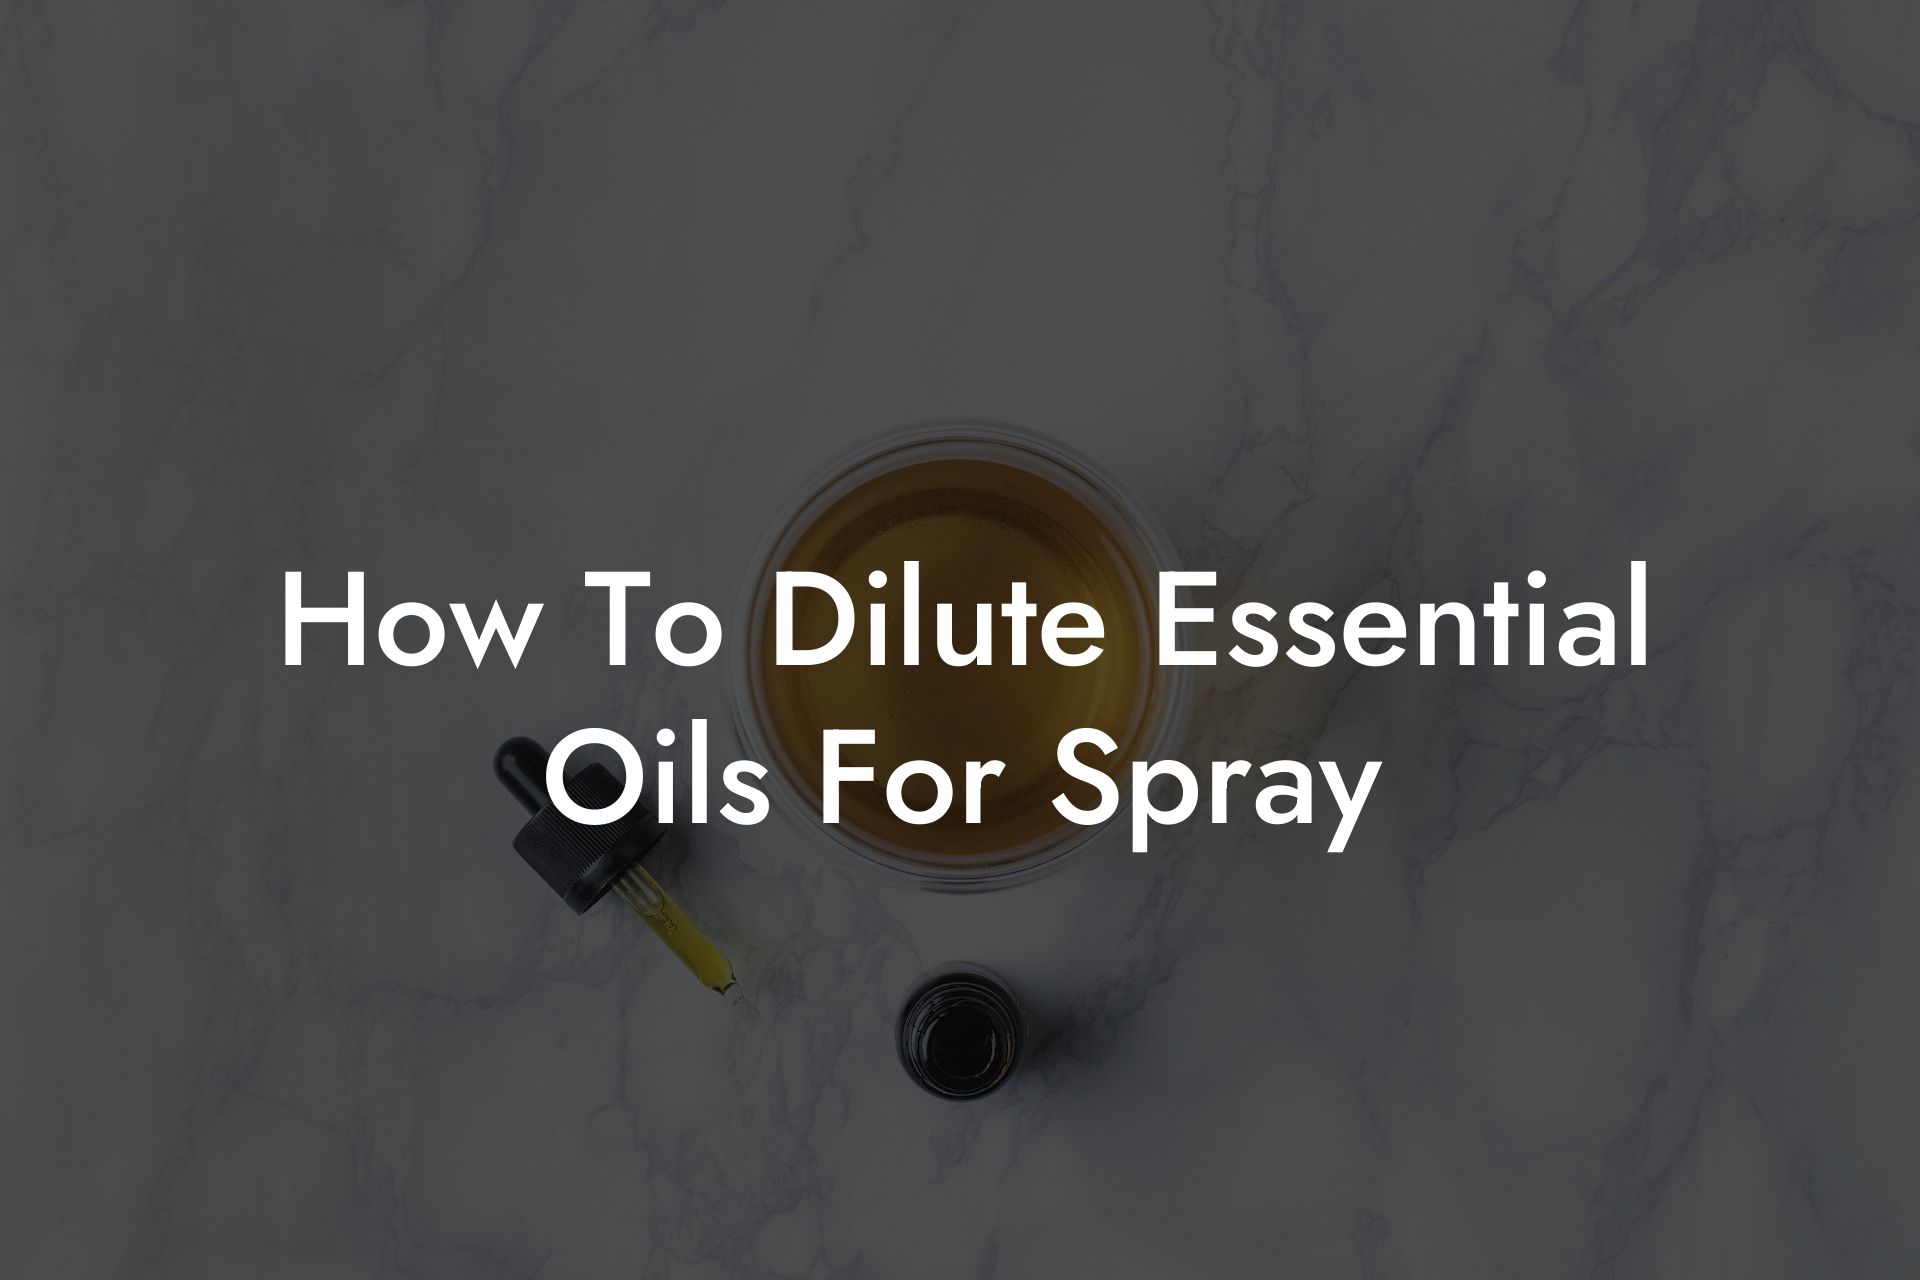 How To Dilute Essential Oils For Spray